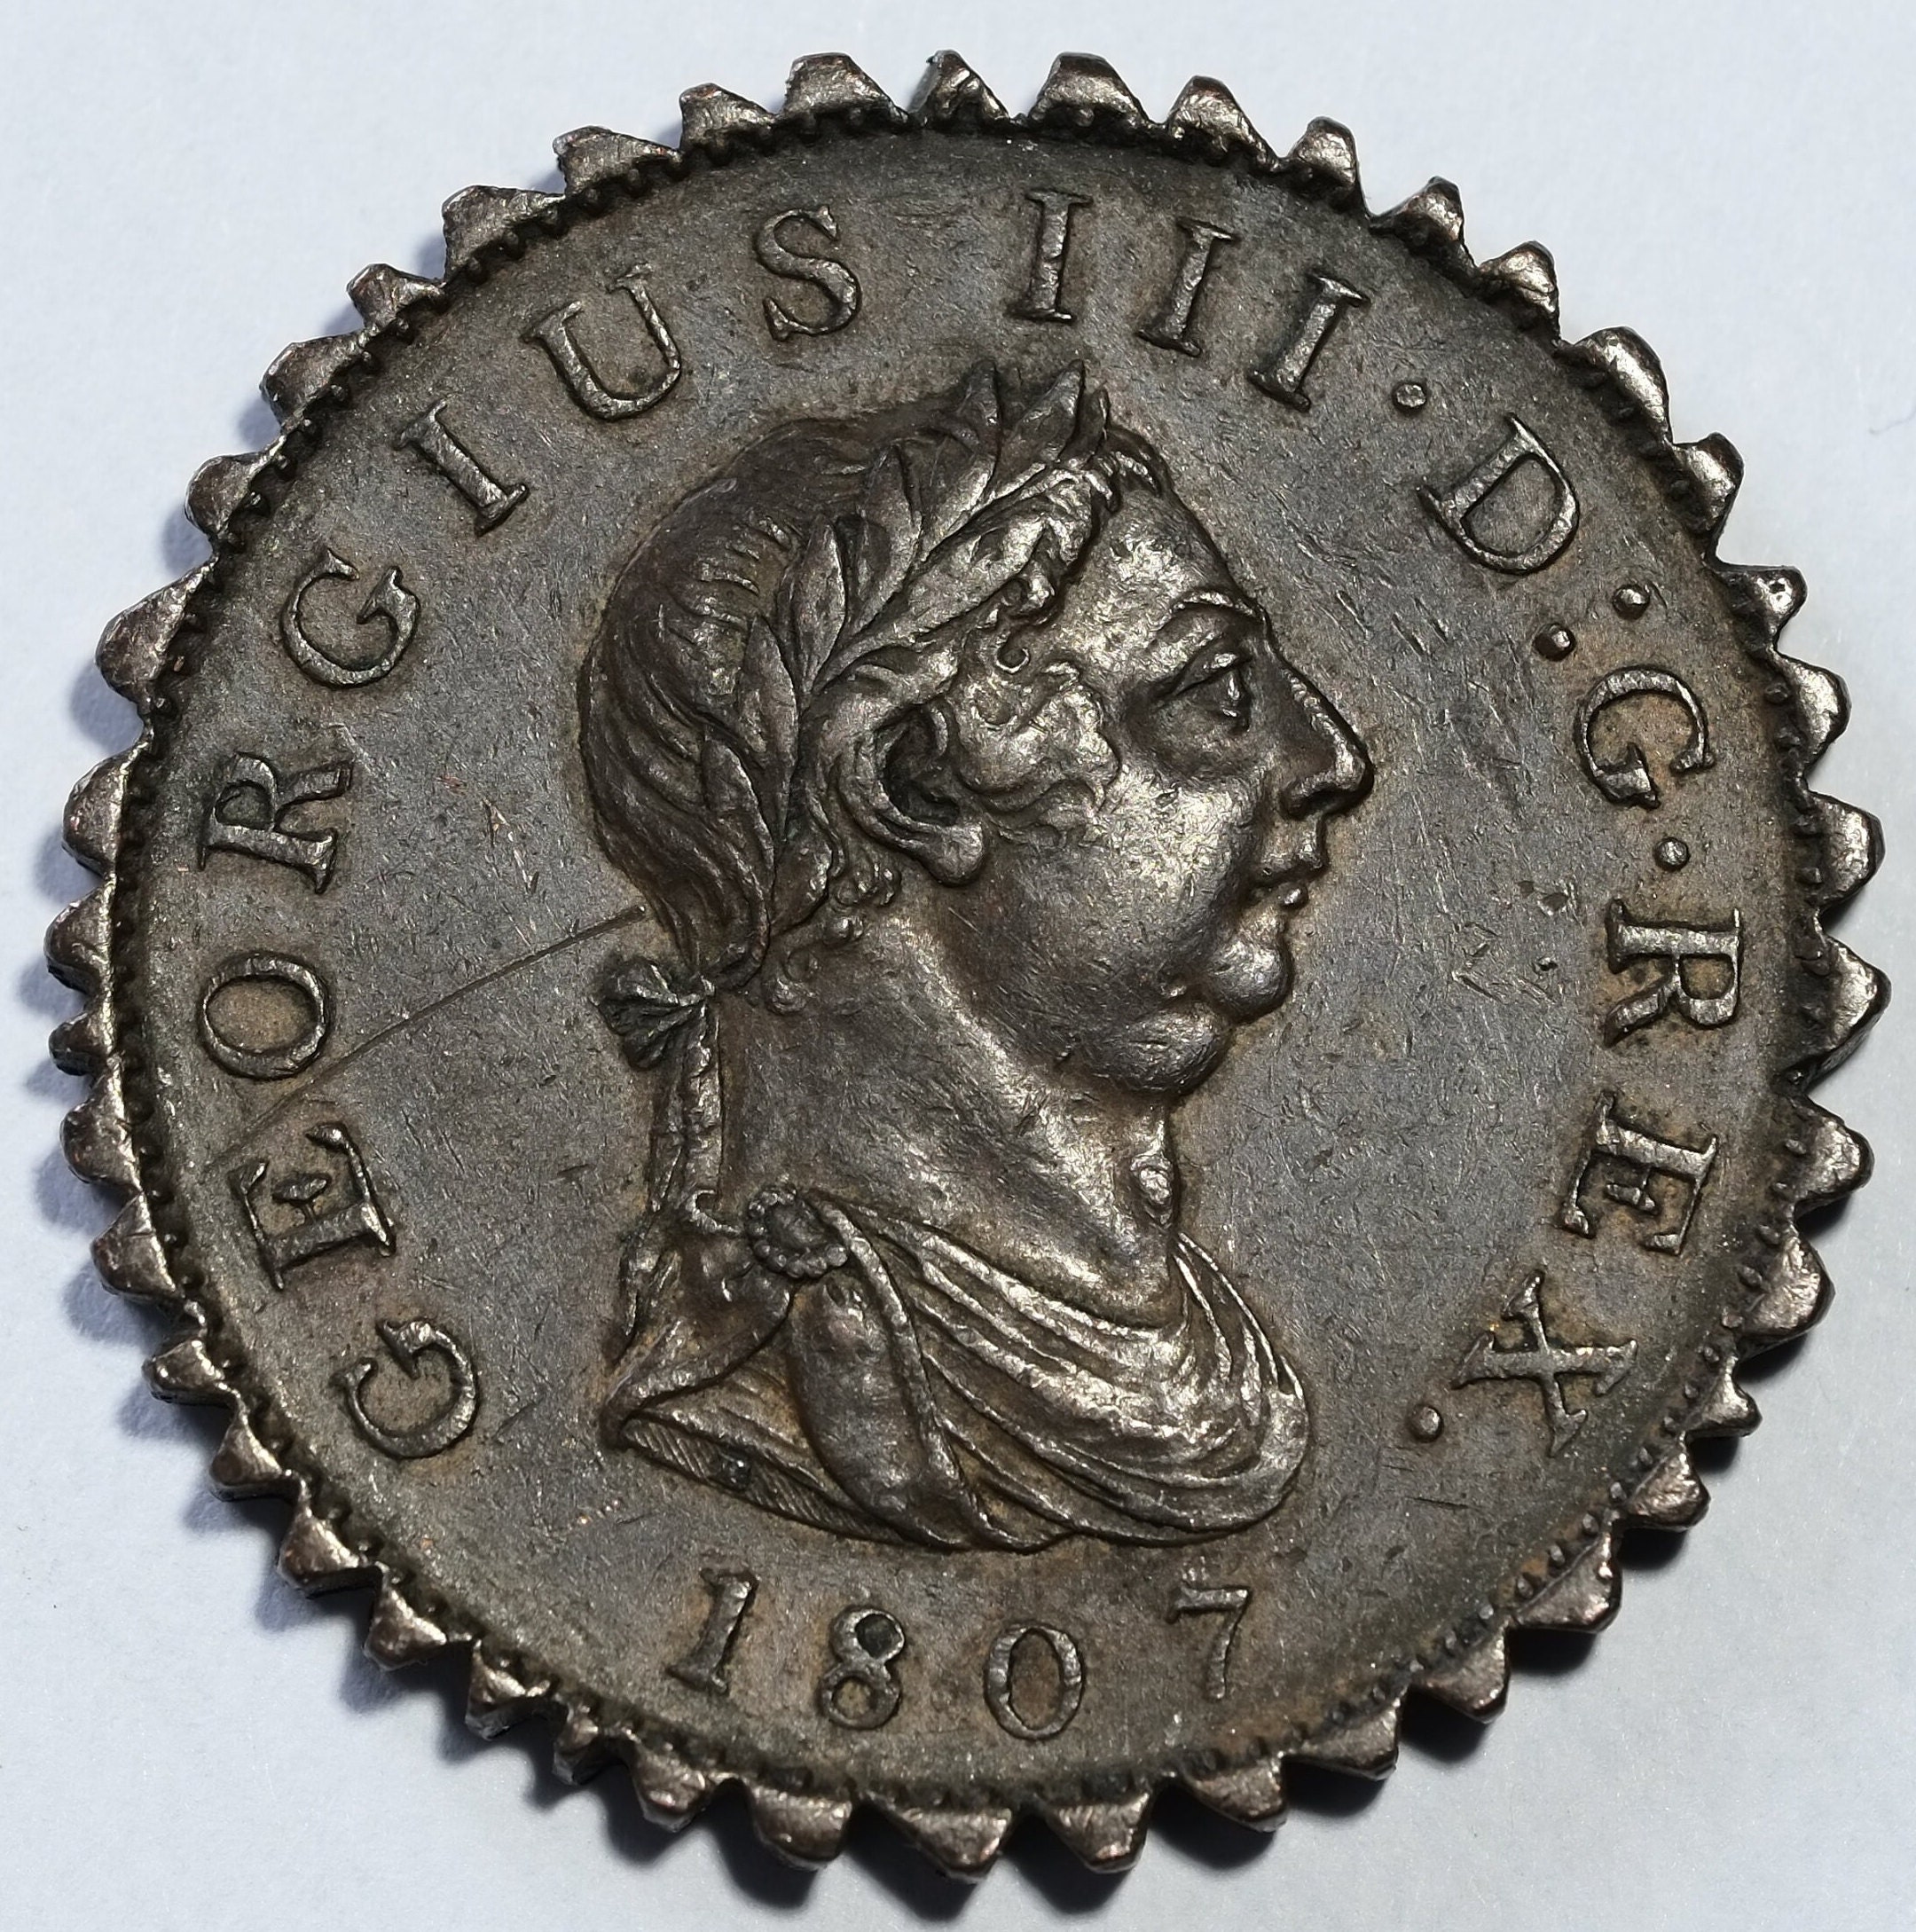 George III One Penny with spiked edge possible apprentice piece